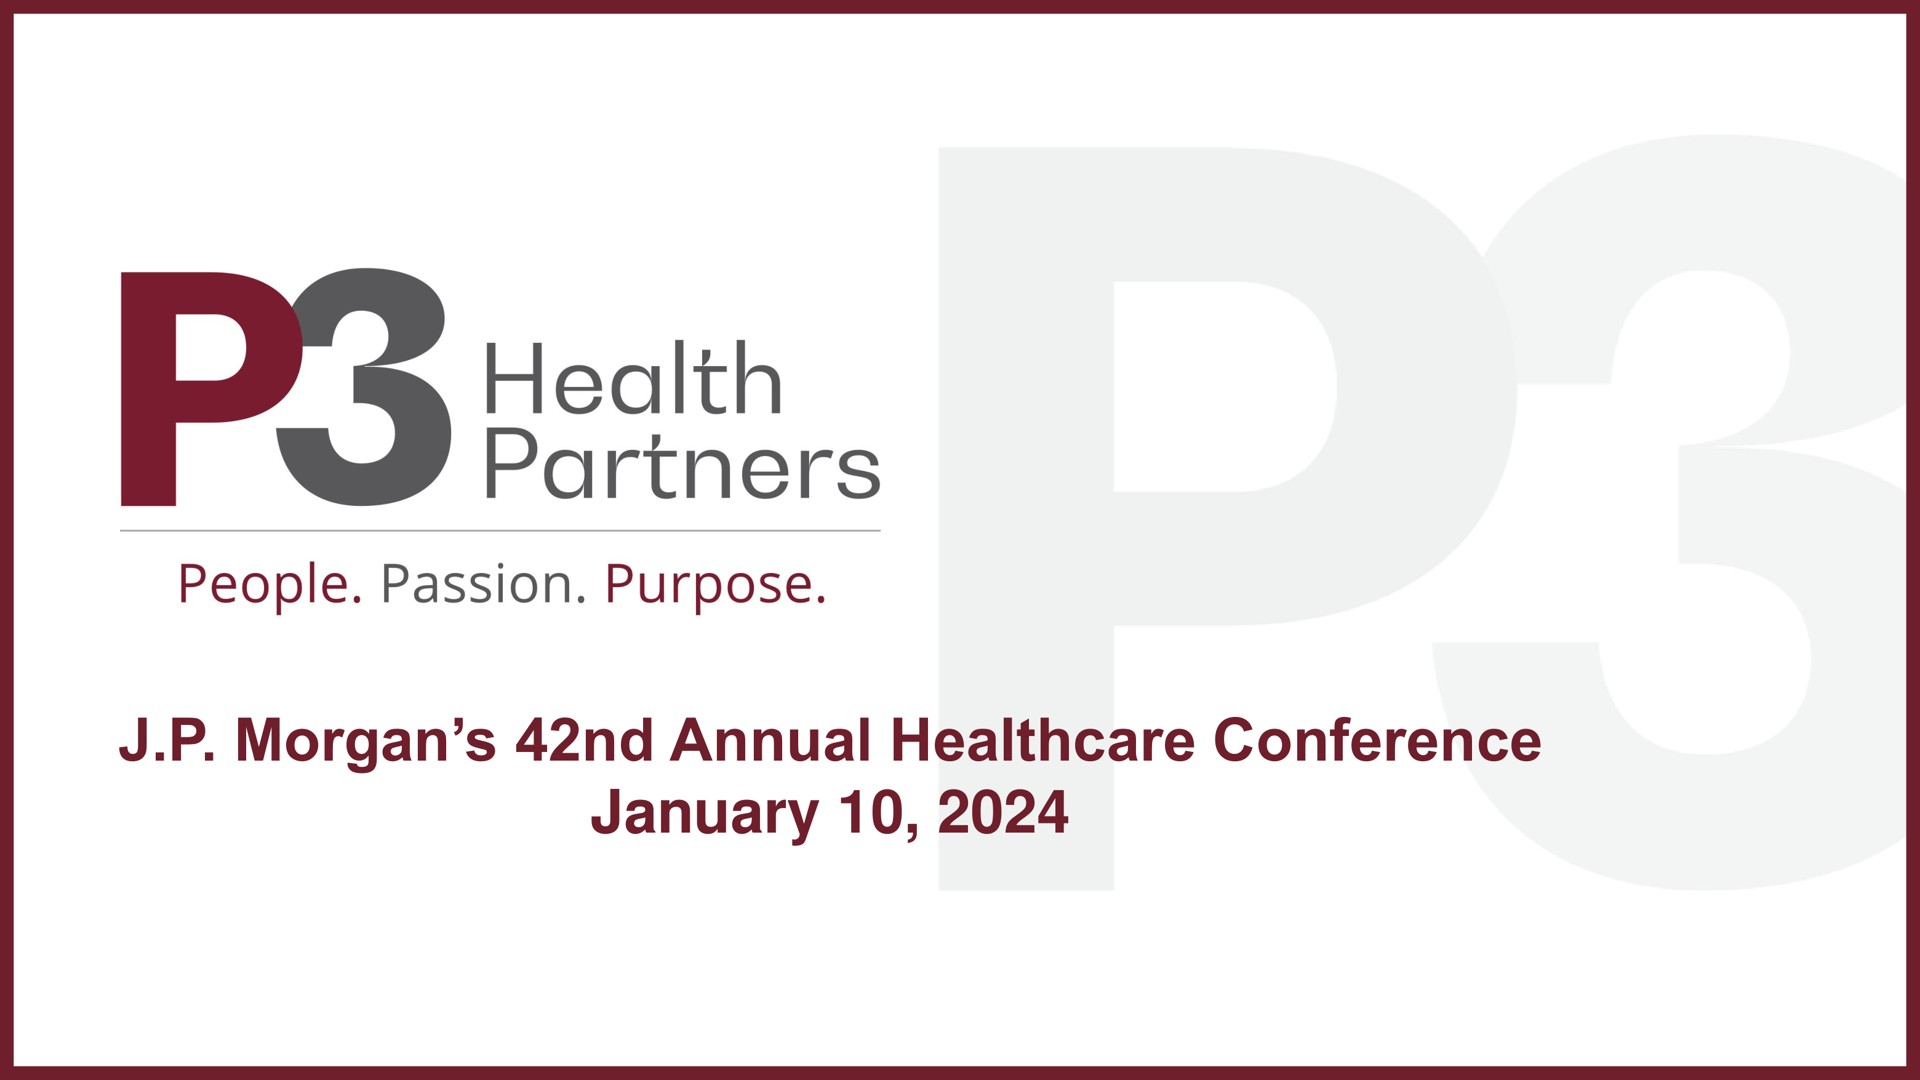 morgan annual conference health partners people passion purpose | P3 Health Partners